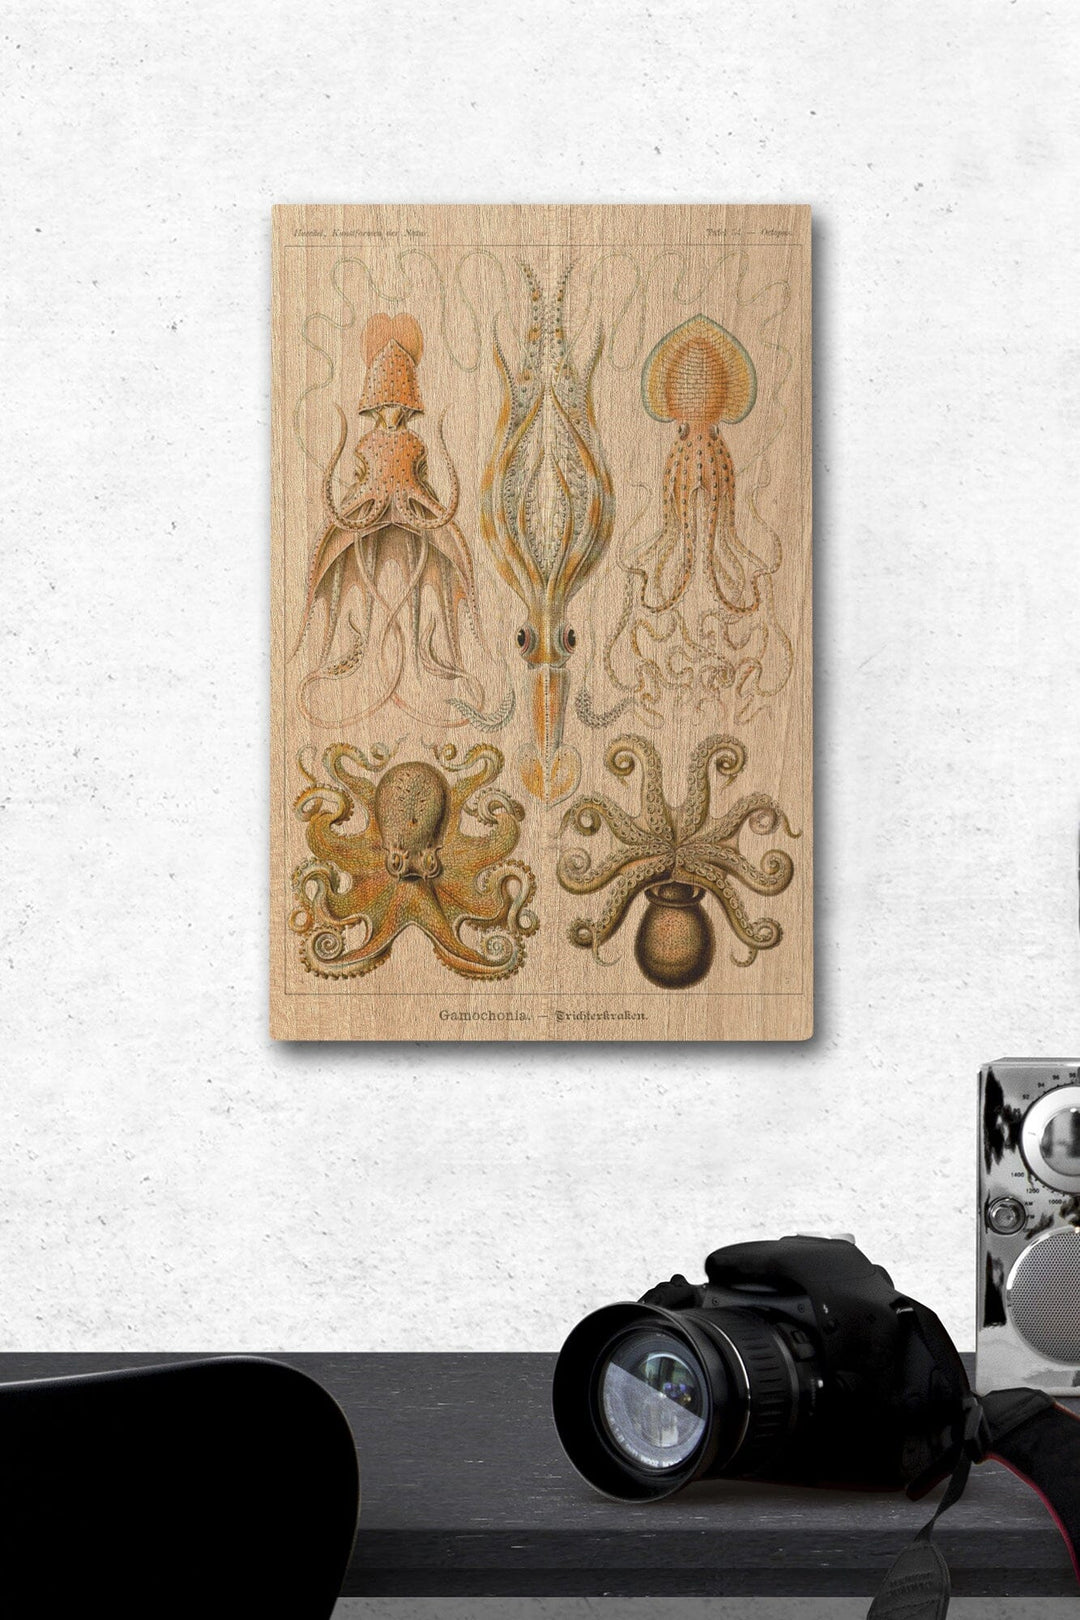 Art Forms of Nature, Gamochonia (Octopuses & Squids), Ernst Haeckel Artwork, Wood Signs and Postcards Wood Lantern Press 12 x 18 Wood Gallery Print 